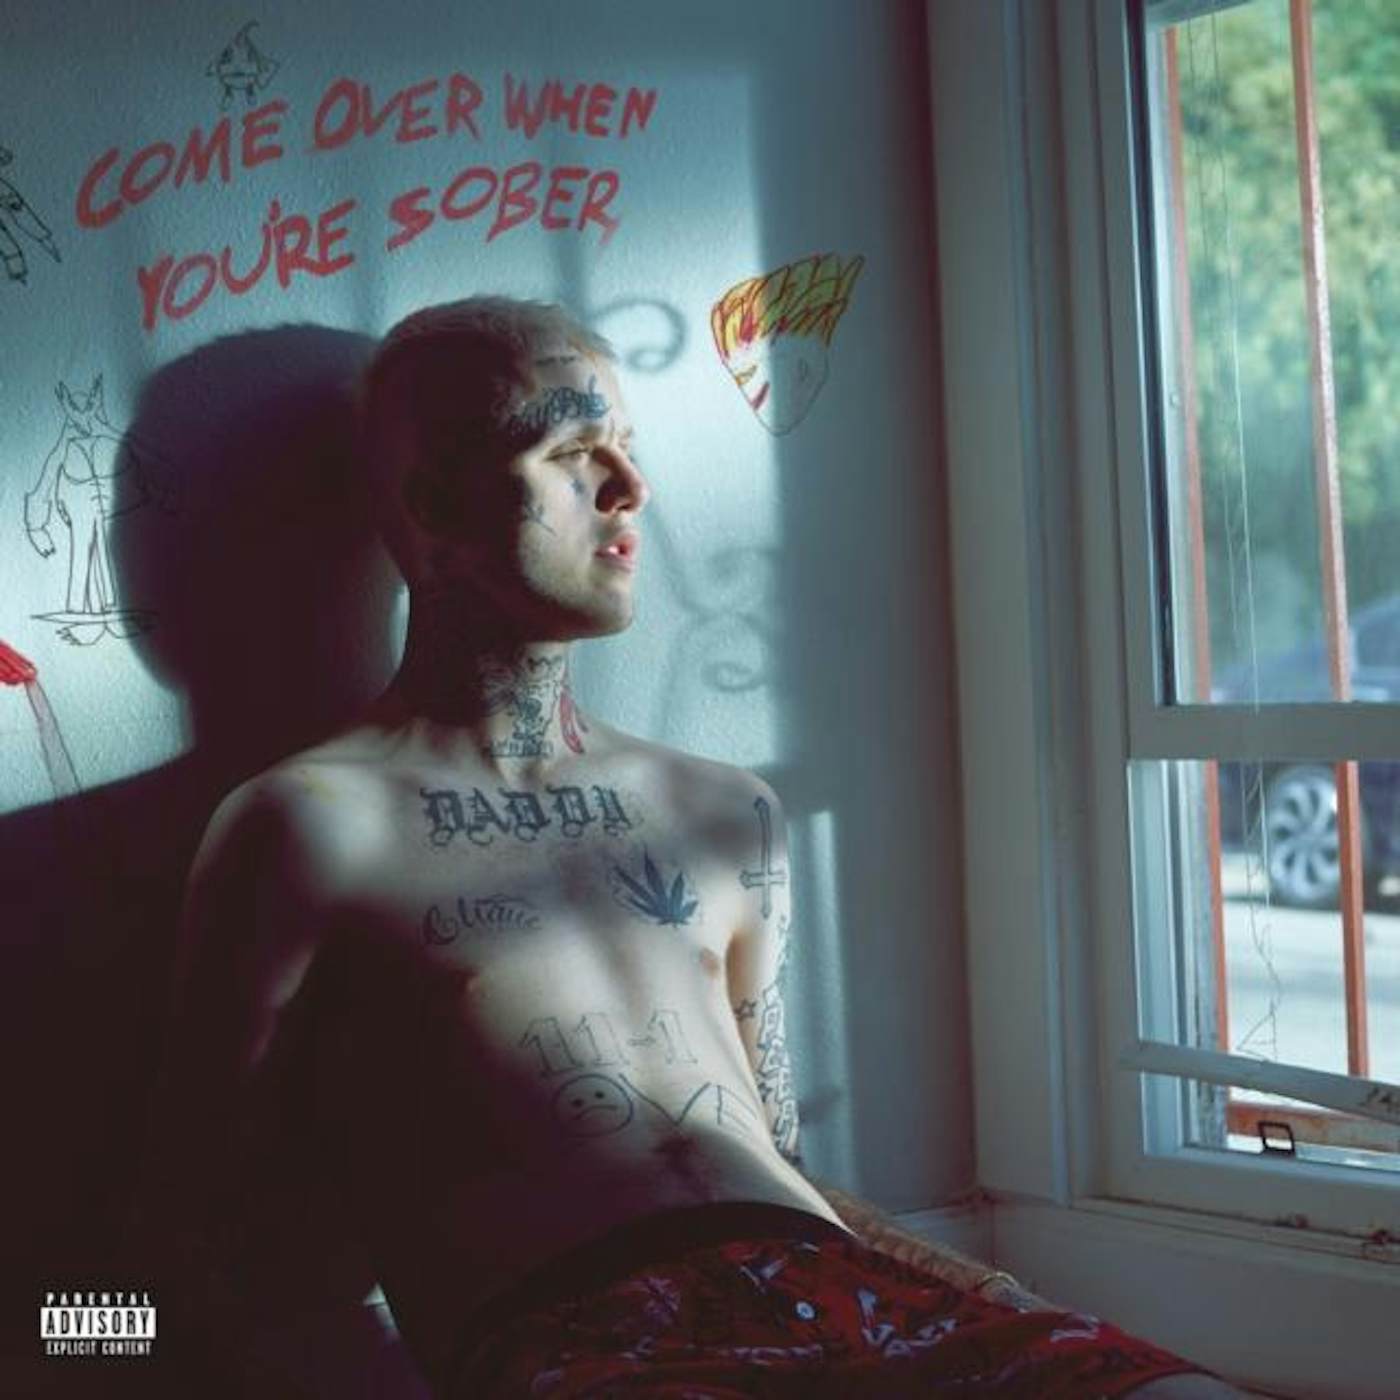 Lil Peep LP Vinyl Record - Come Over When You're Sober Part. 2